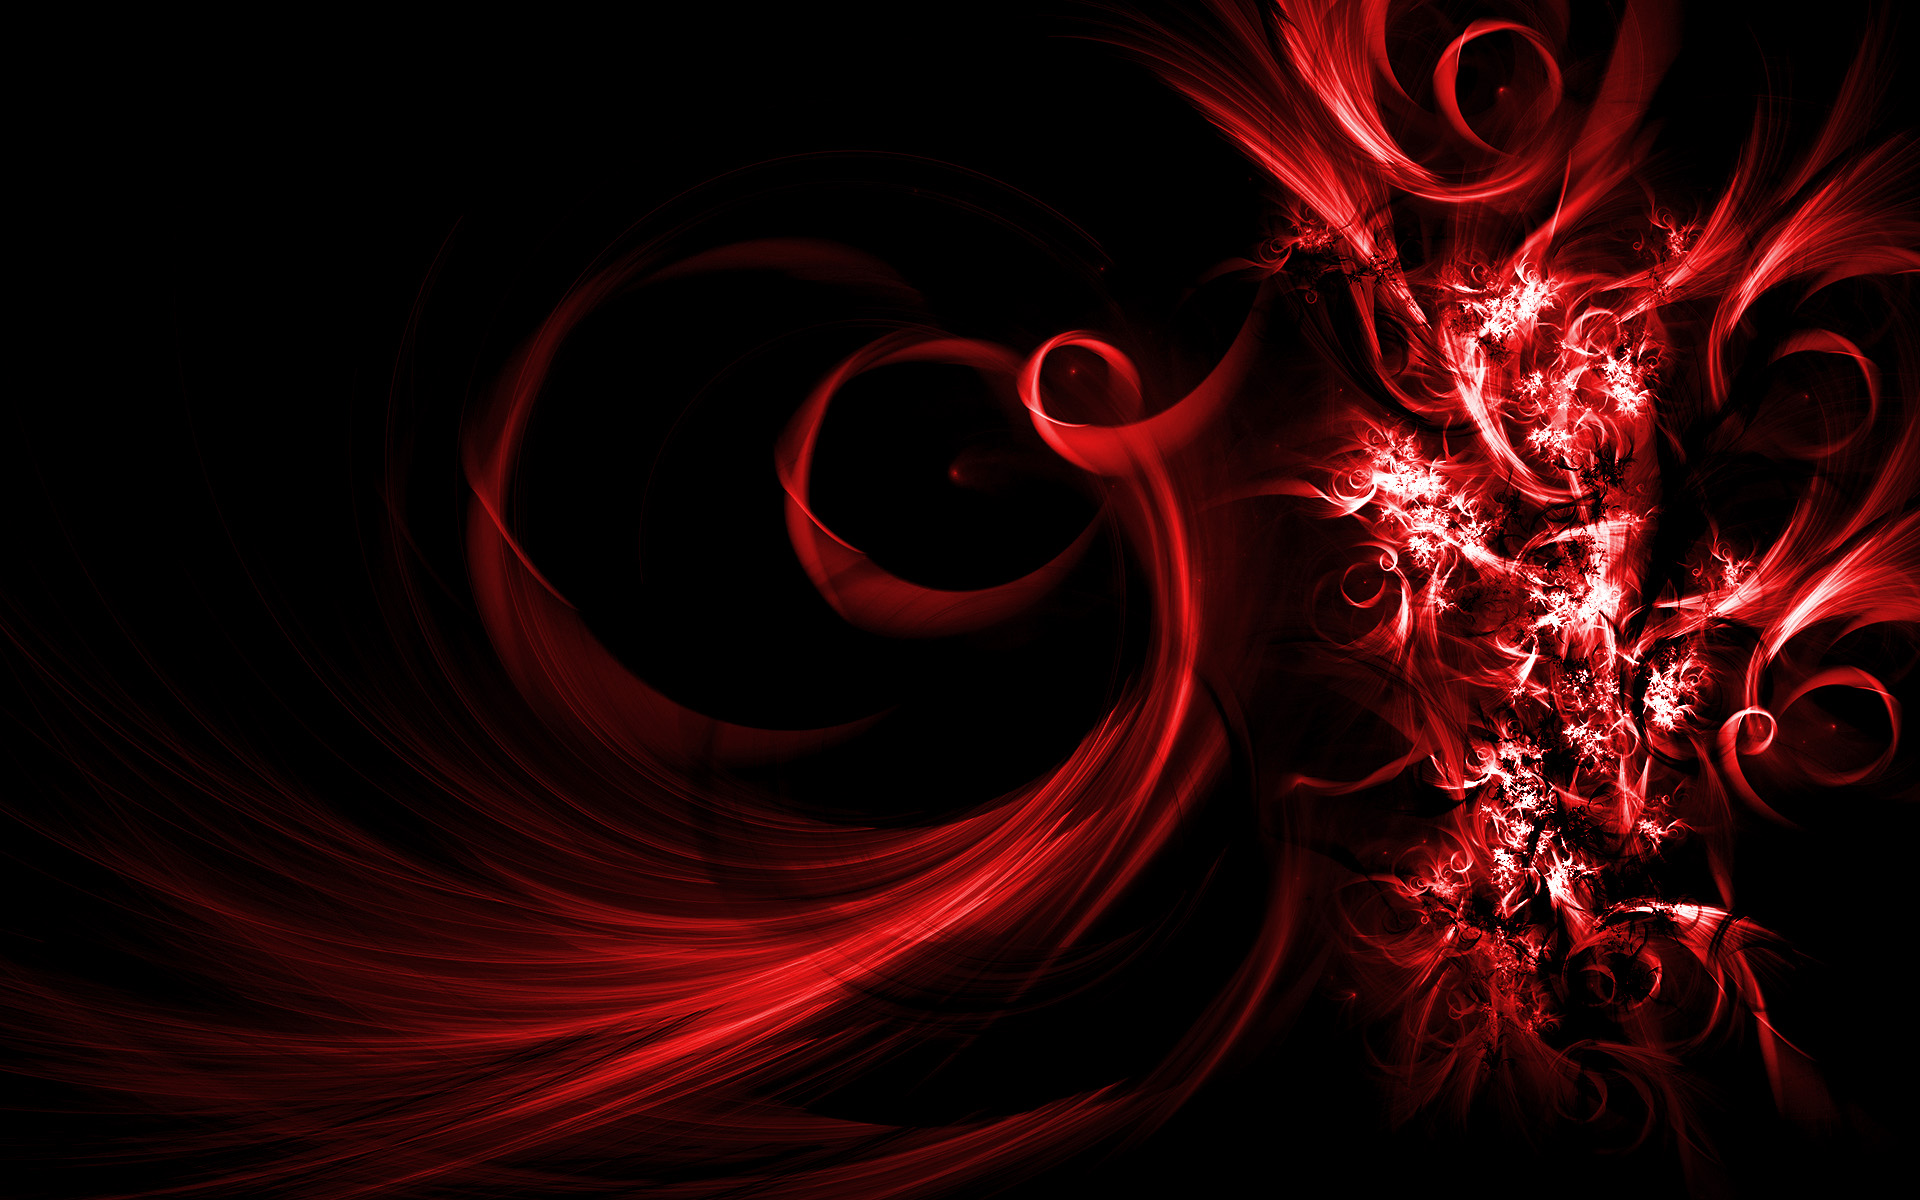 Cool abstract wallpaper designs red Wallpaper